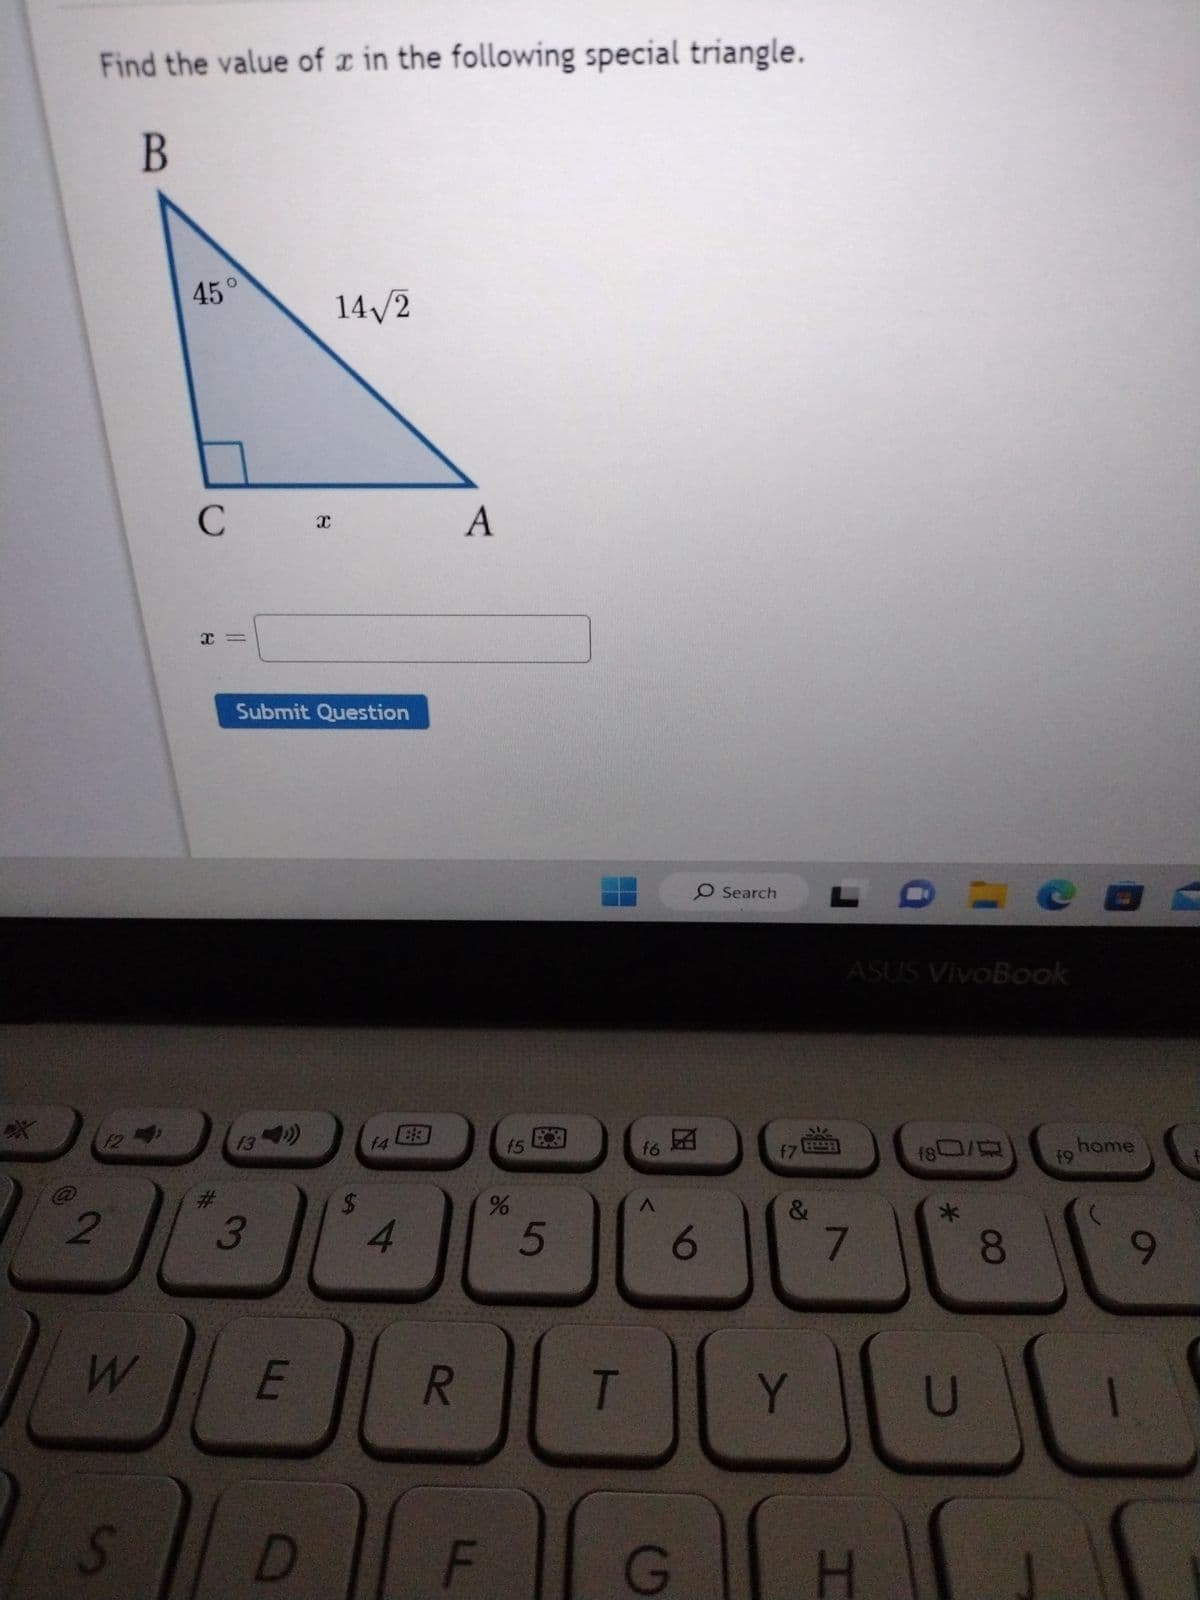 Find the value of x in the following special triangle.
B
2
12
W
S
45°
C
x=
1
3
Submit Question
E
X
D
14√/2
$
f4
4
R
A
LL
f5
%
5
T
f6
1
O Search
6
G
f7
Y
ASUS VivoBook
7
H
f80/R
U
8
19
home
9